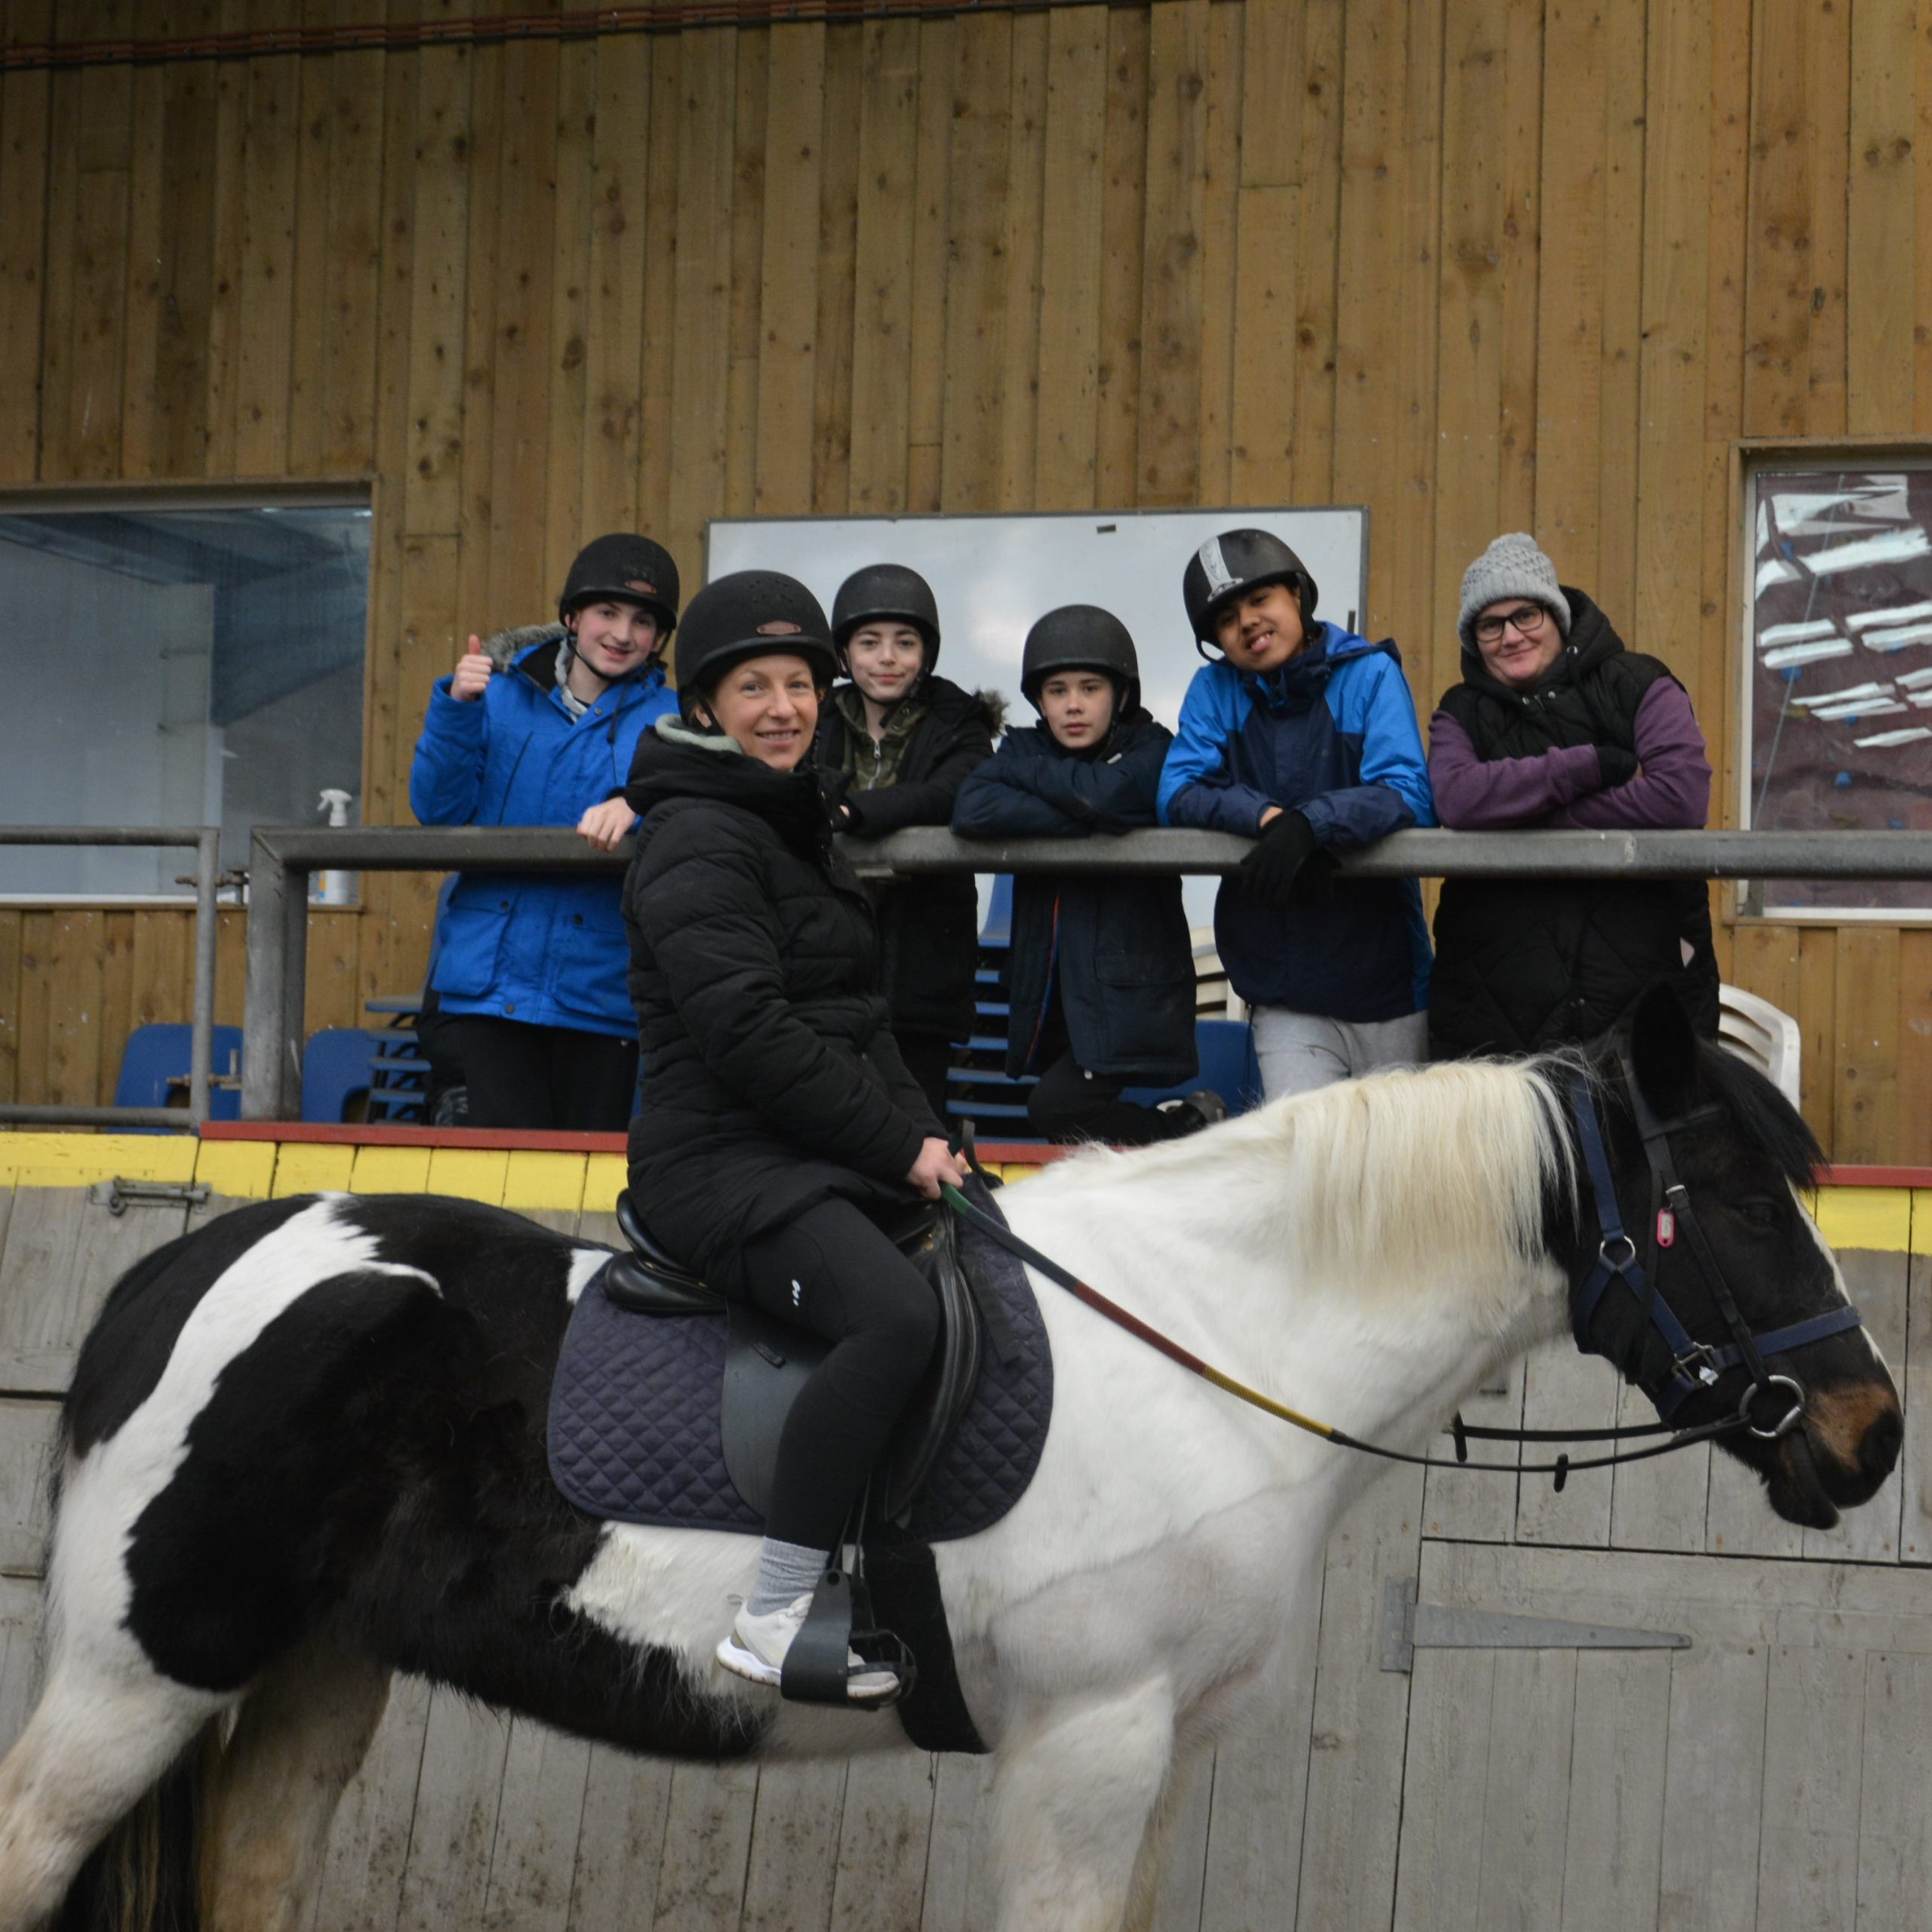 A woman riding black and white horse is sitting side-on but she is smiling at the camera. Behind her, at a higher level, is a group of young people wearing riding hats smiling at the camera.